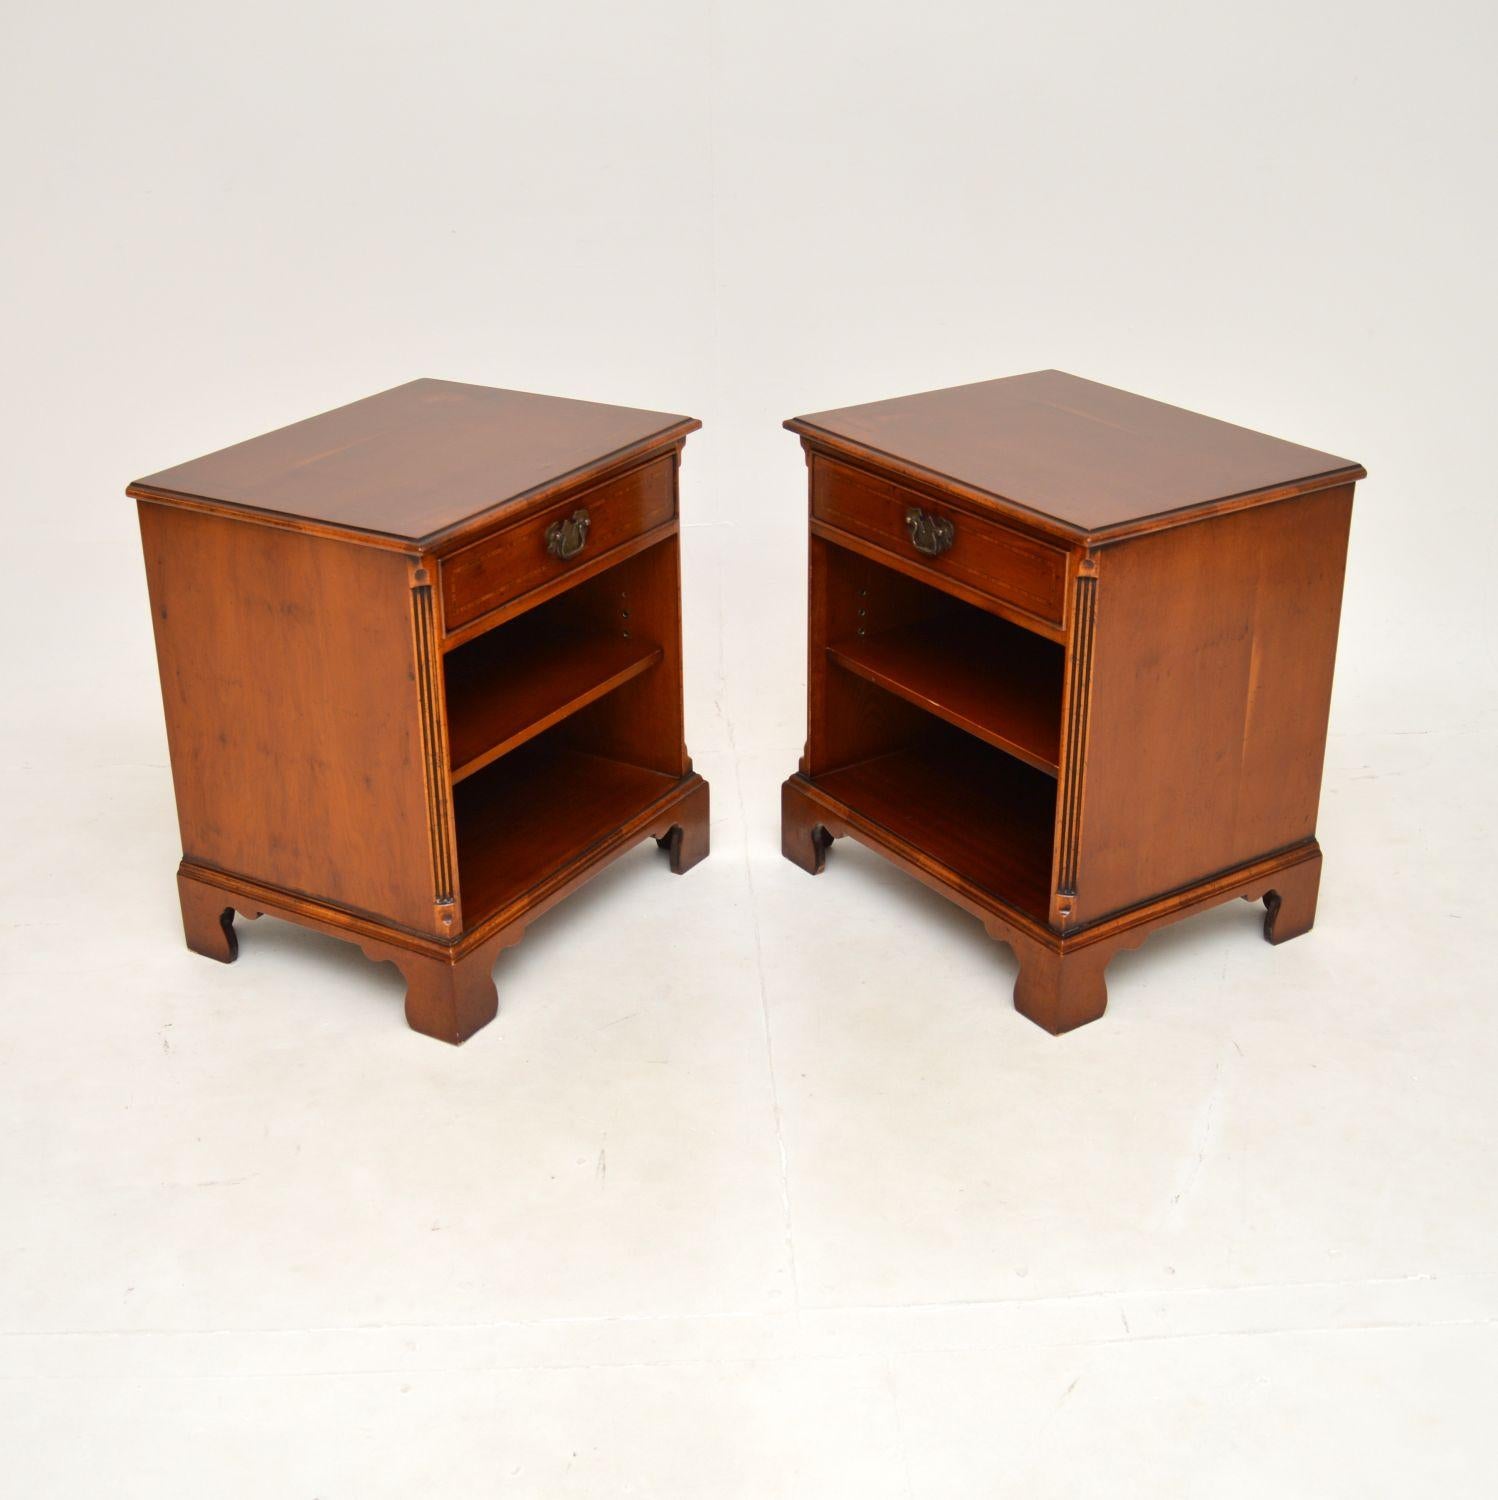 British Pair of Antique Georgian Style Yew Wood Bedside Cabinets